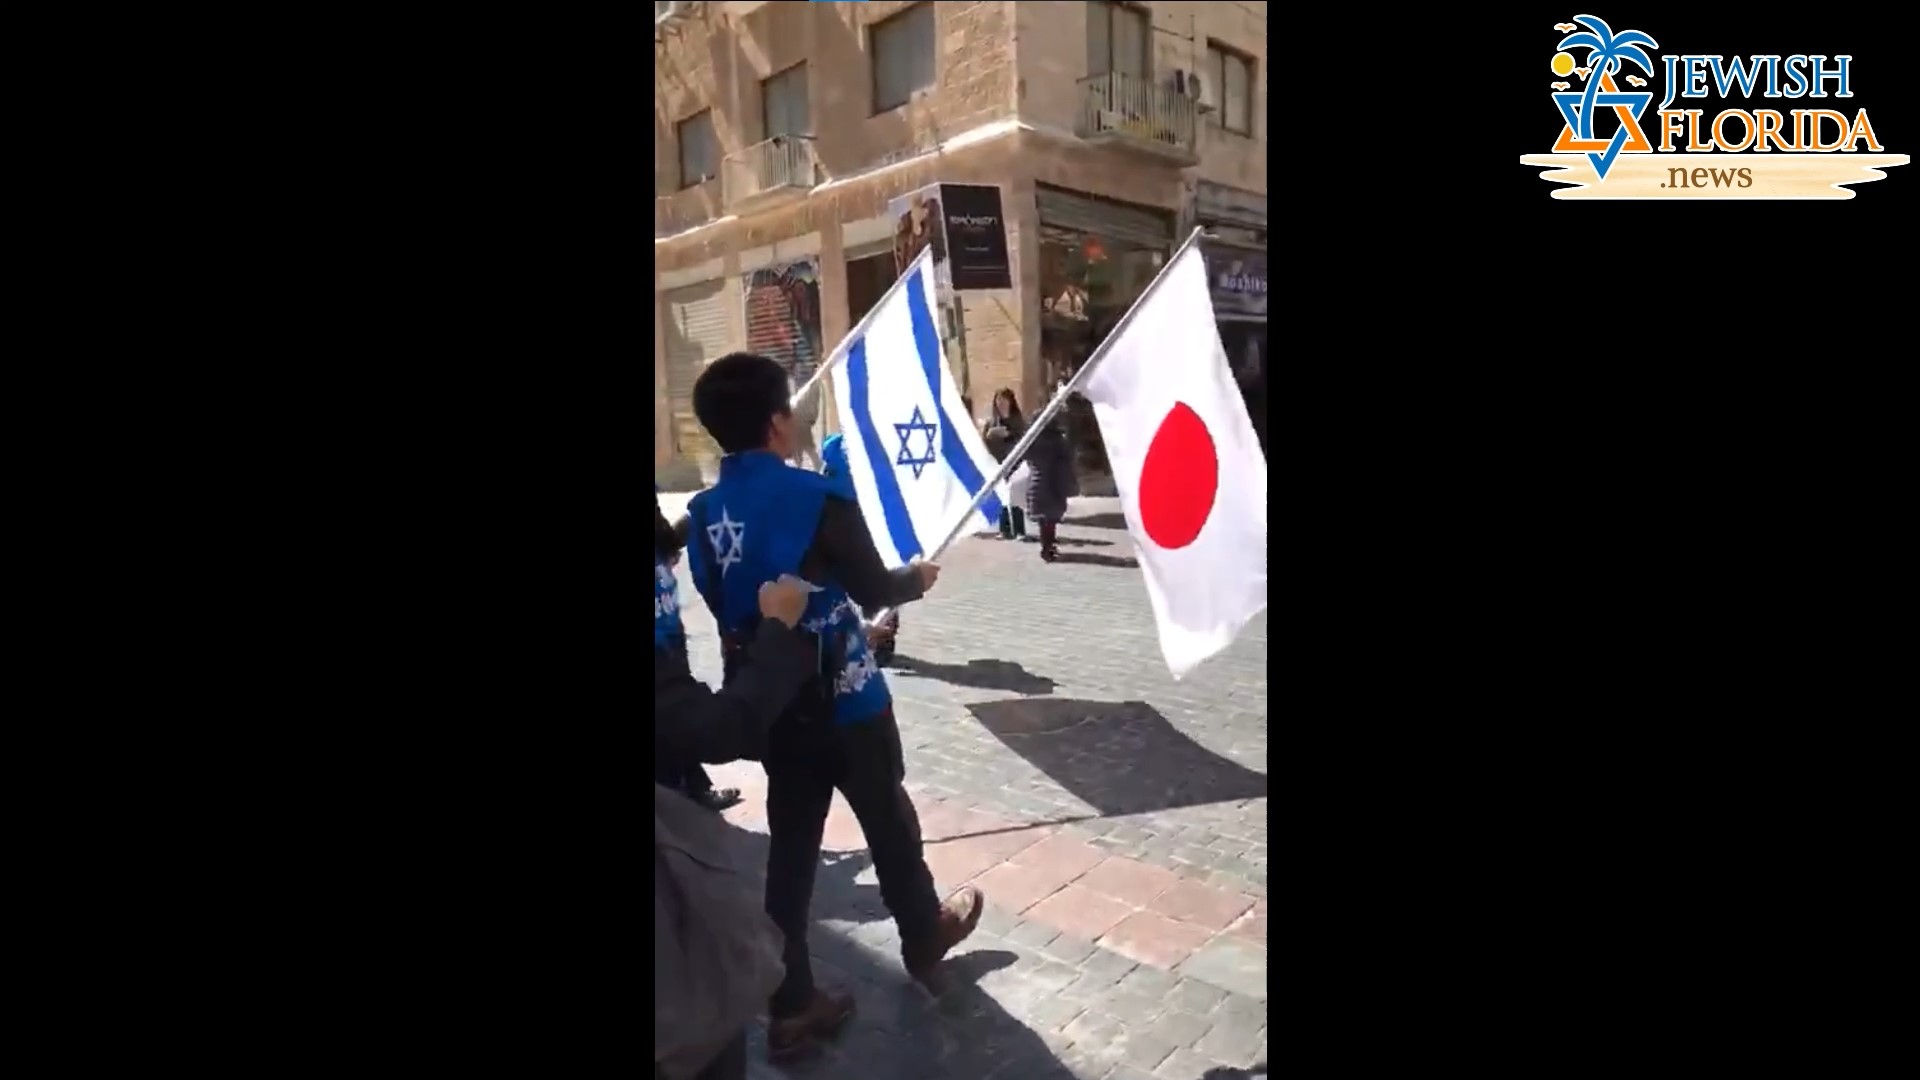 The People of Japan Showing Their Support for Israel